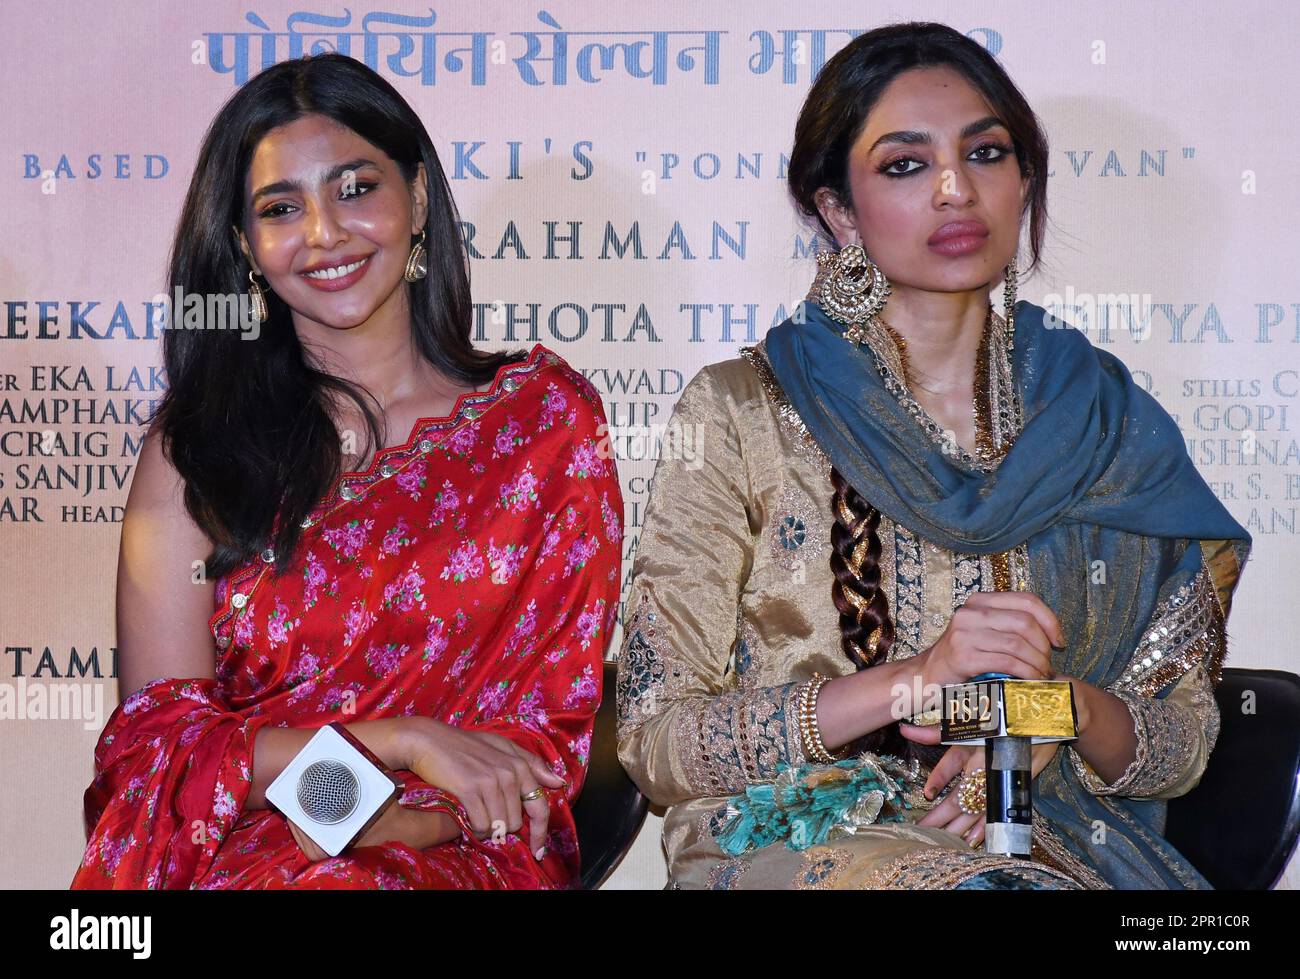 Mumbai, India. 25th Apr, 2023. L-R Indian film actress and producer Aishwarya Lekshmi and actress Sobhita Dhulipala are seen during the press conference of their upcoming film Ponniyin Selvan (PS-2) in Mumbai. The film will release in theaters on 28th April 2023 in Tamil, Telugu, Malayalam, Kannada and Hindi languages. (Photo by Ashish Vaishnav/SOPA Images/Sipa USA) Credit: Sipa USA/Alamy Live News Stock Photo